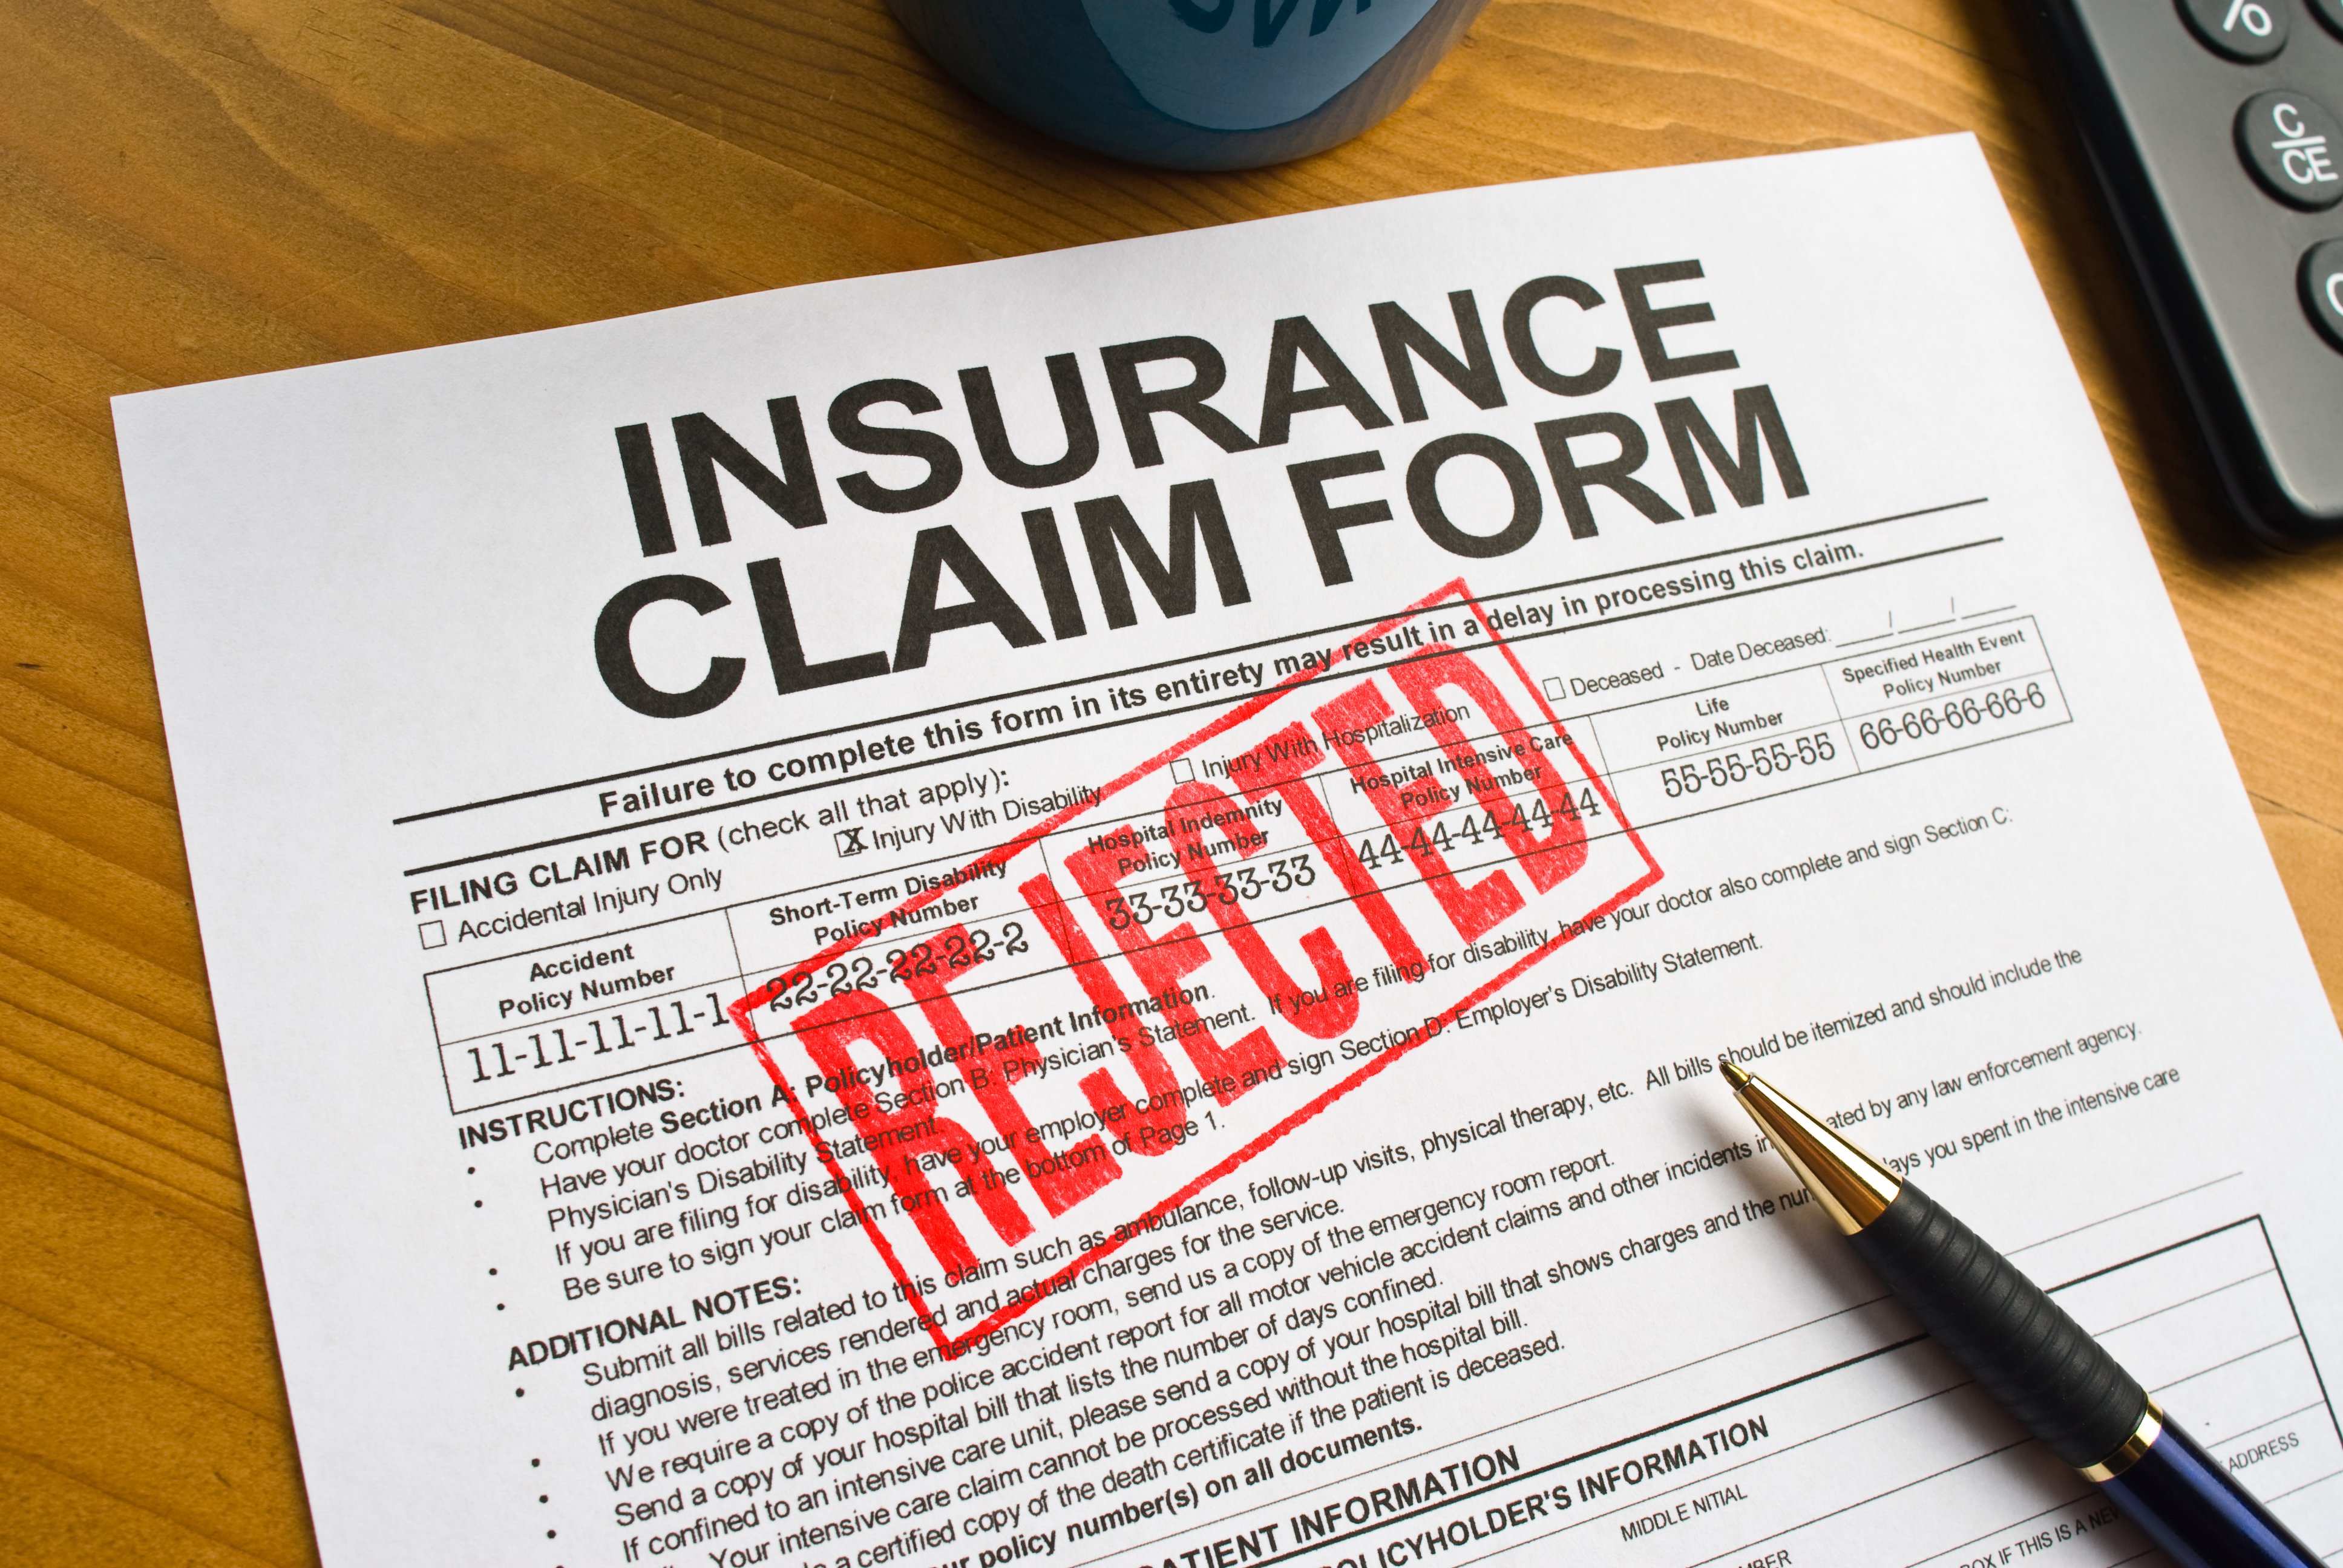 Rejected insurance claim form